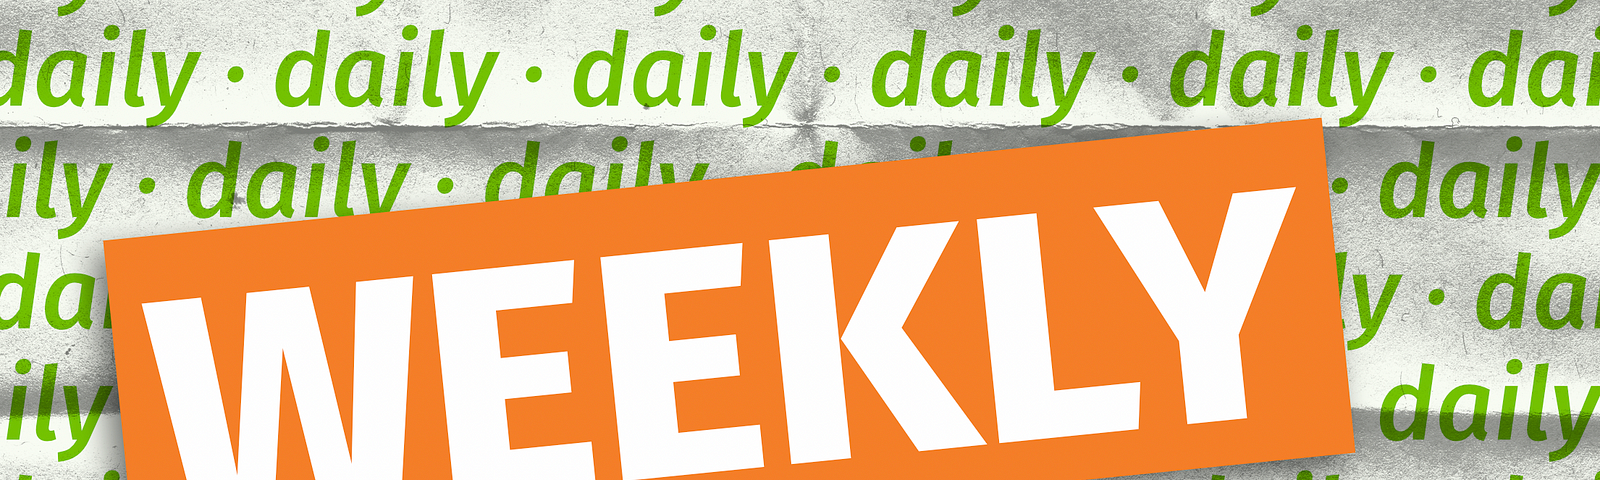 The word WEEKLY is written in big type at an angle overlaying the word “daily”, which is written in smaller type, repeated many times